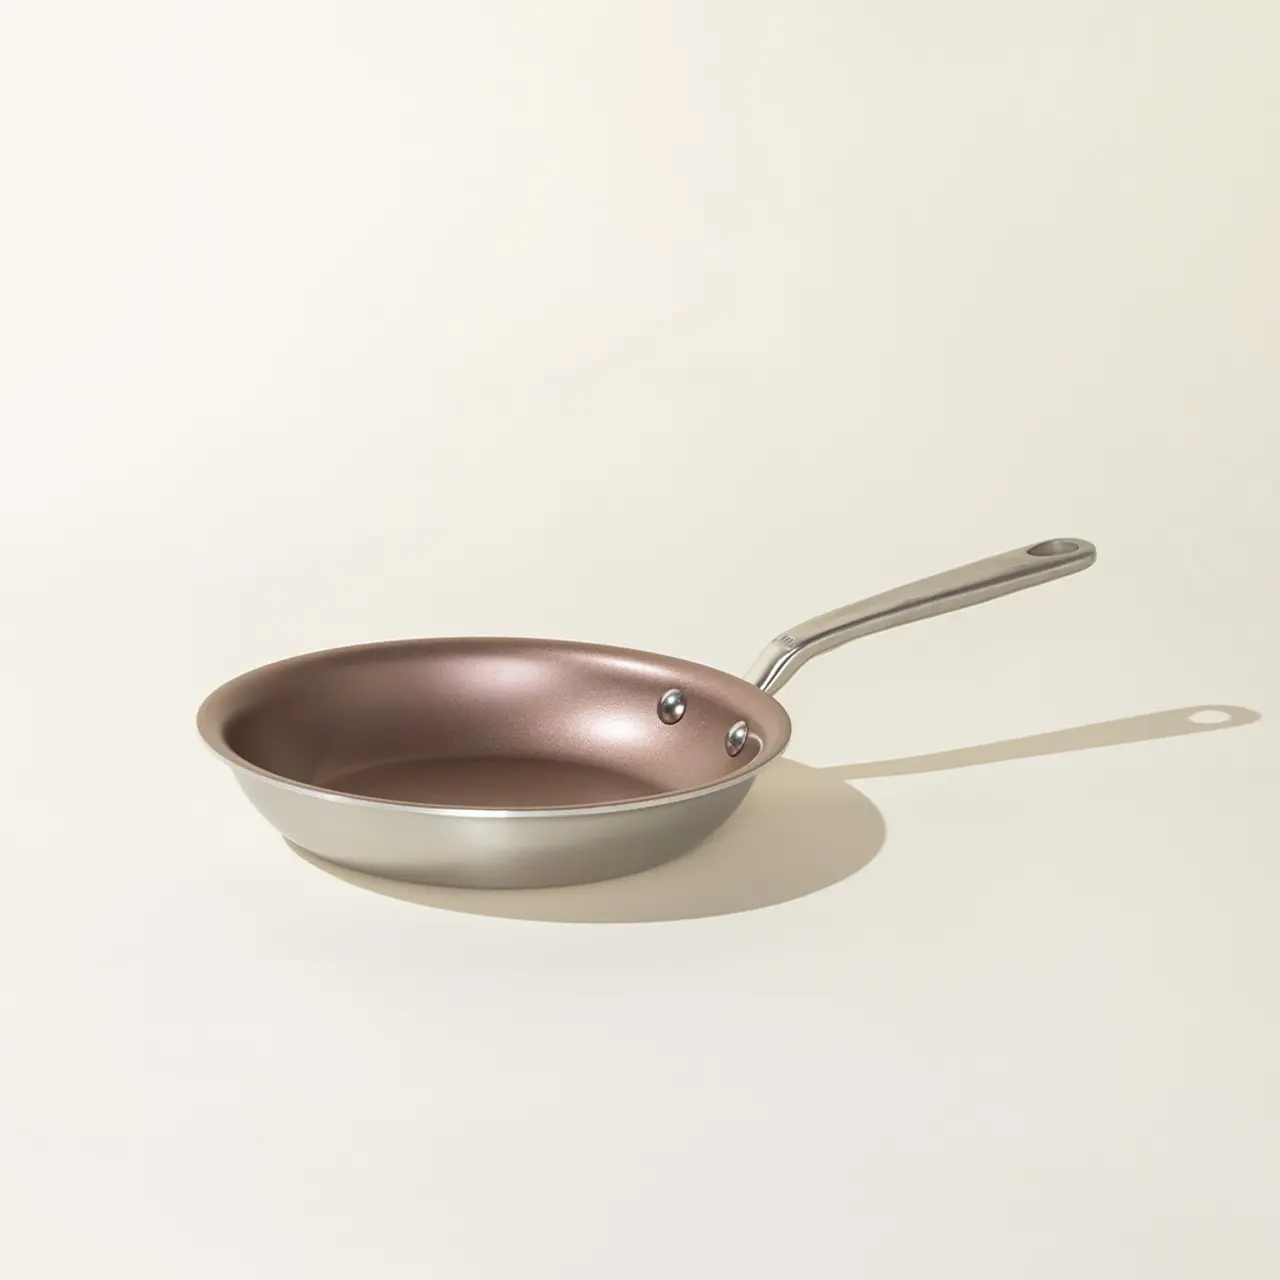 A copper-colored frying pan with a silver handle lies against a neutral background.